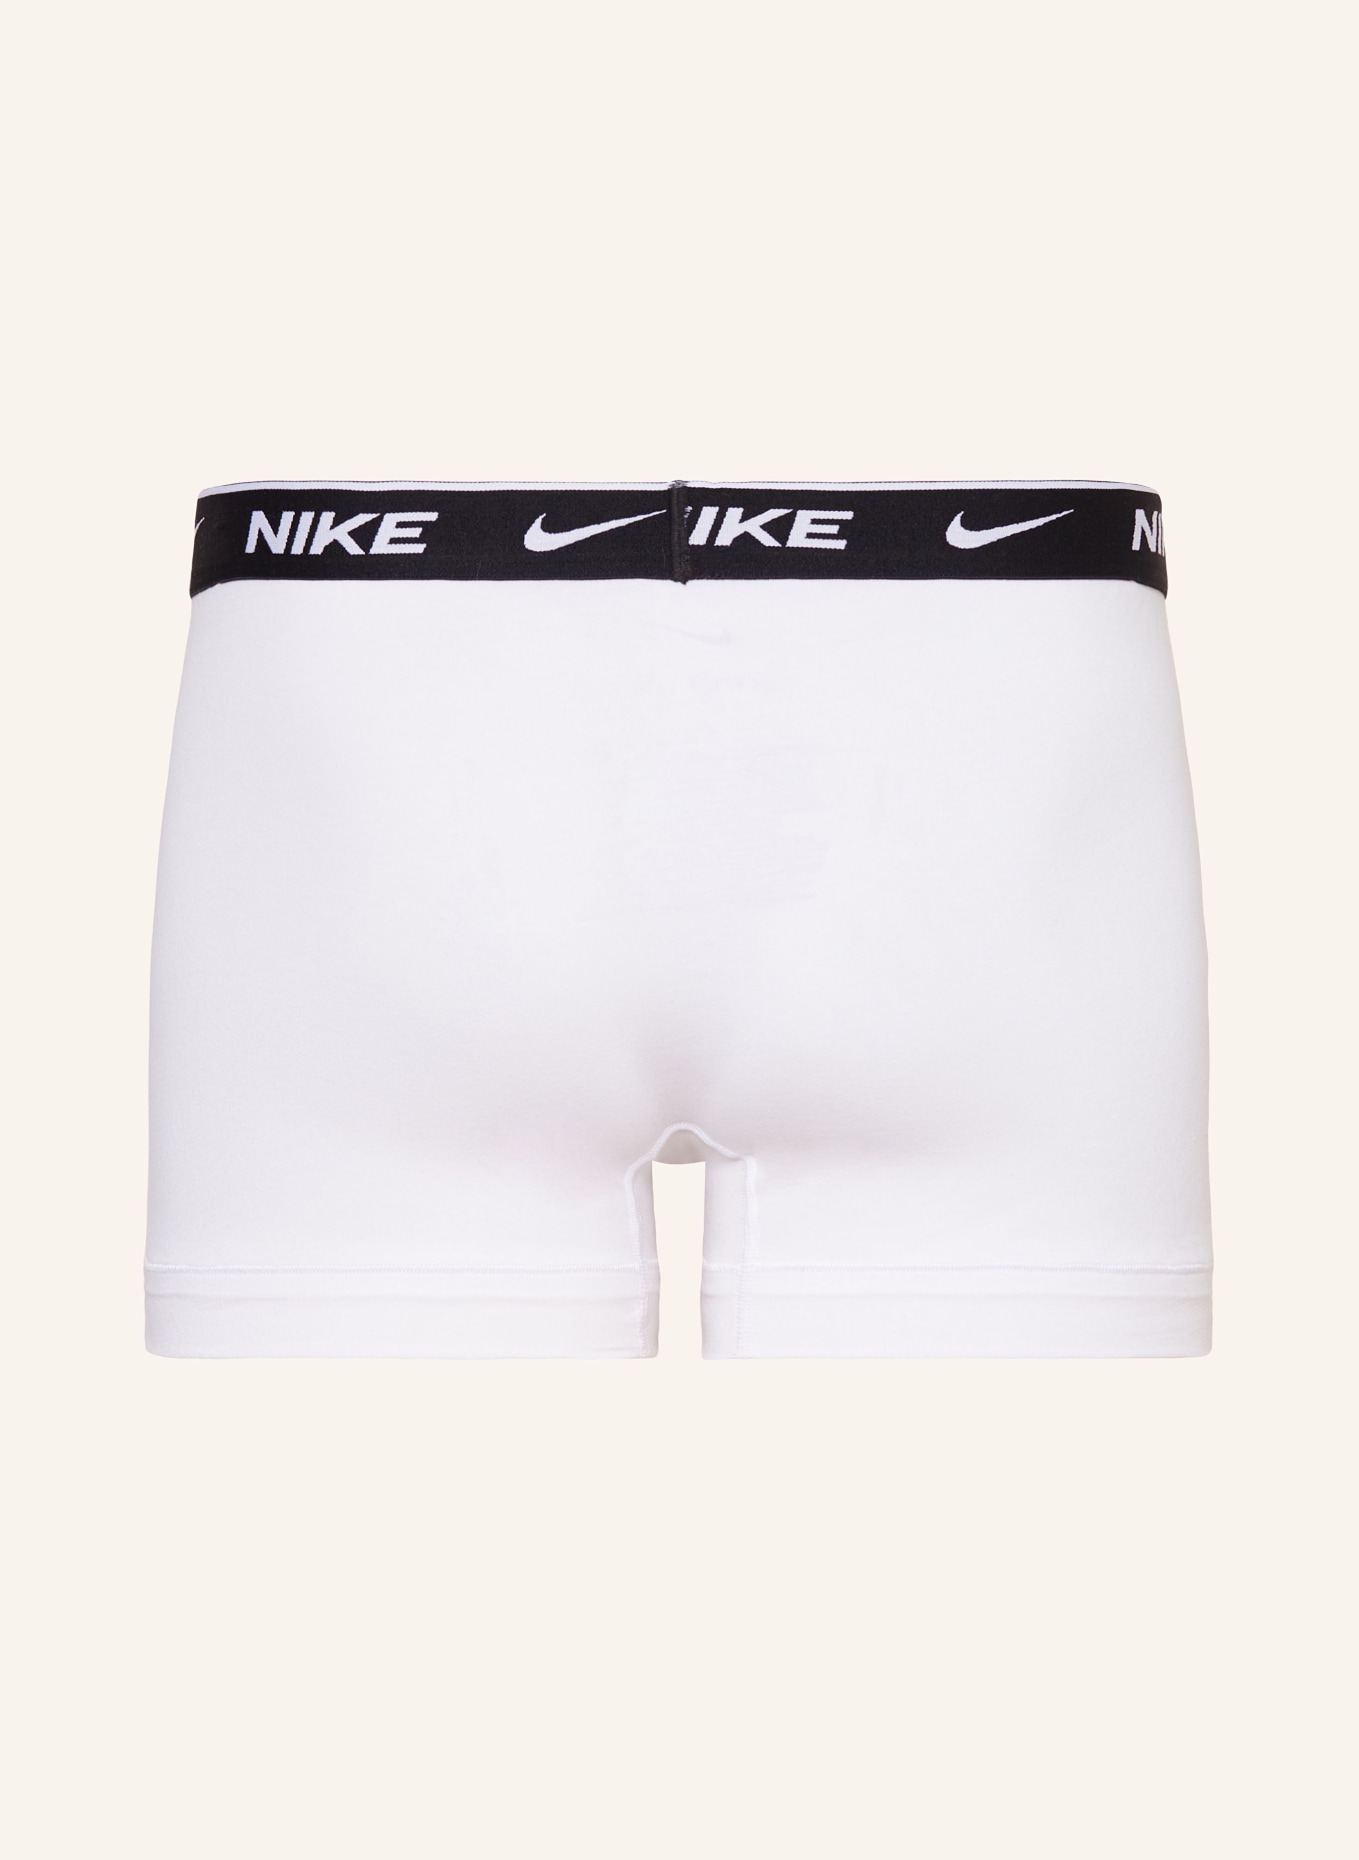 Nike 3er-Pack Boxershorts EVERDAY COTTON STRETCH, Farbe: WEISS (Bild 2)